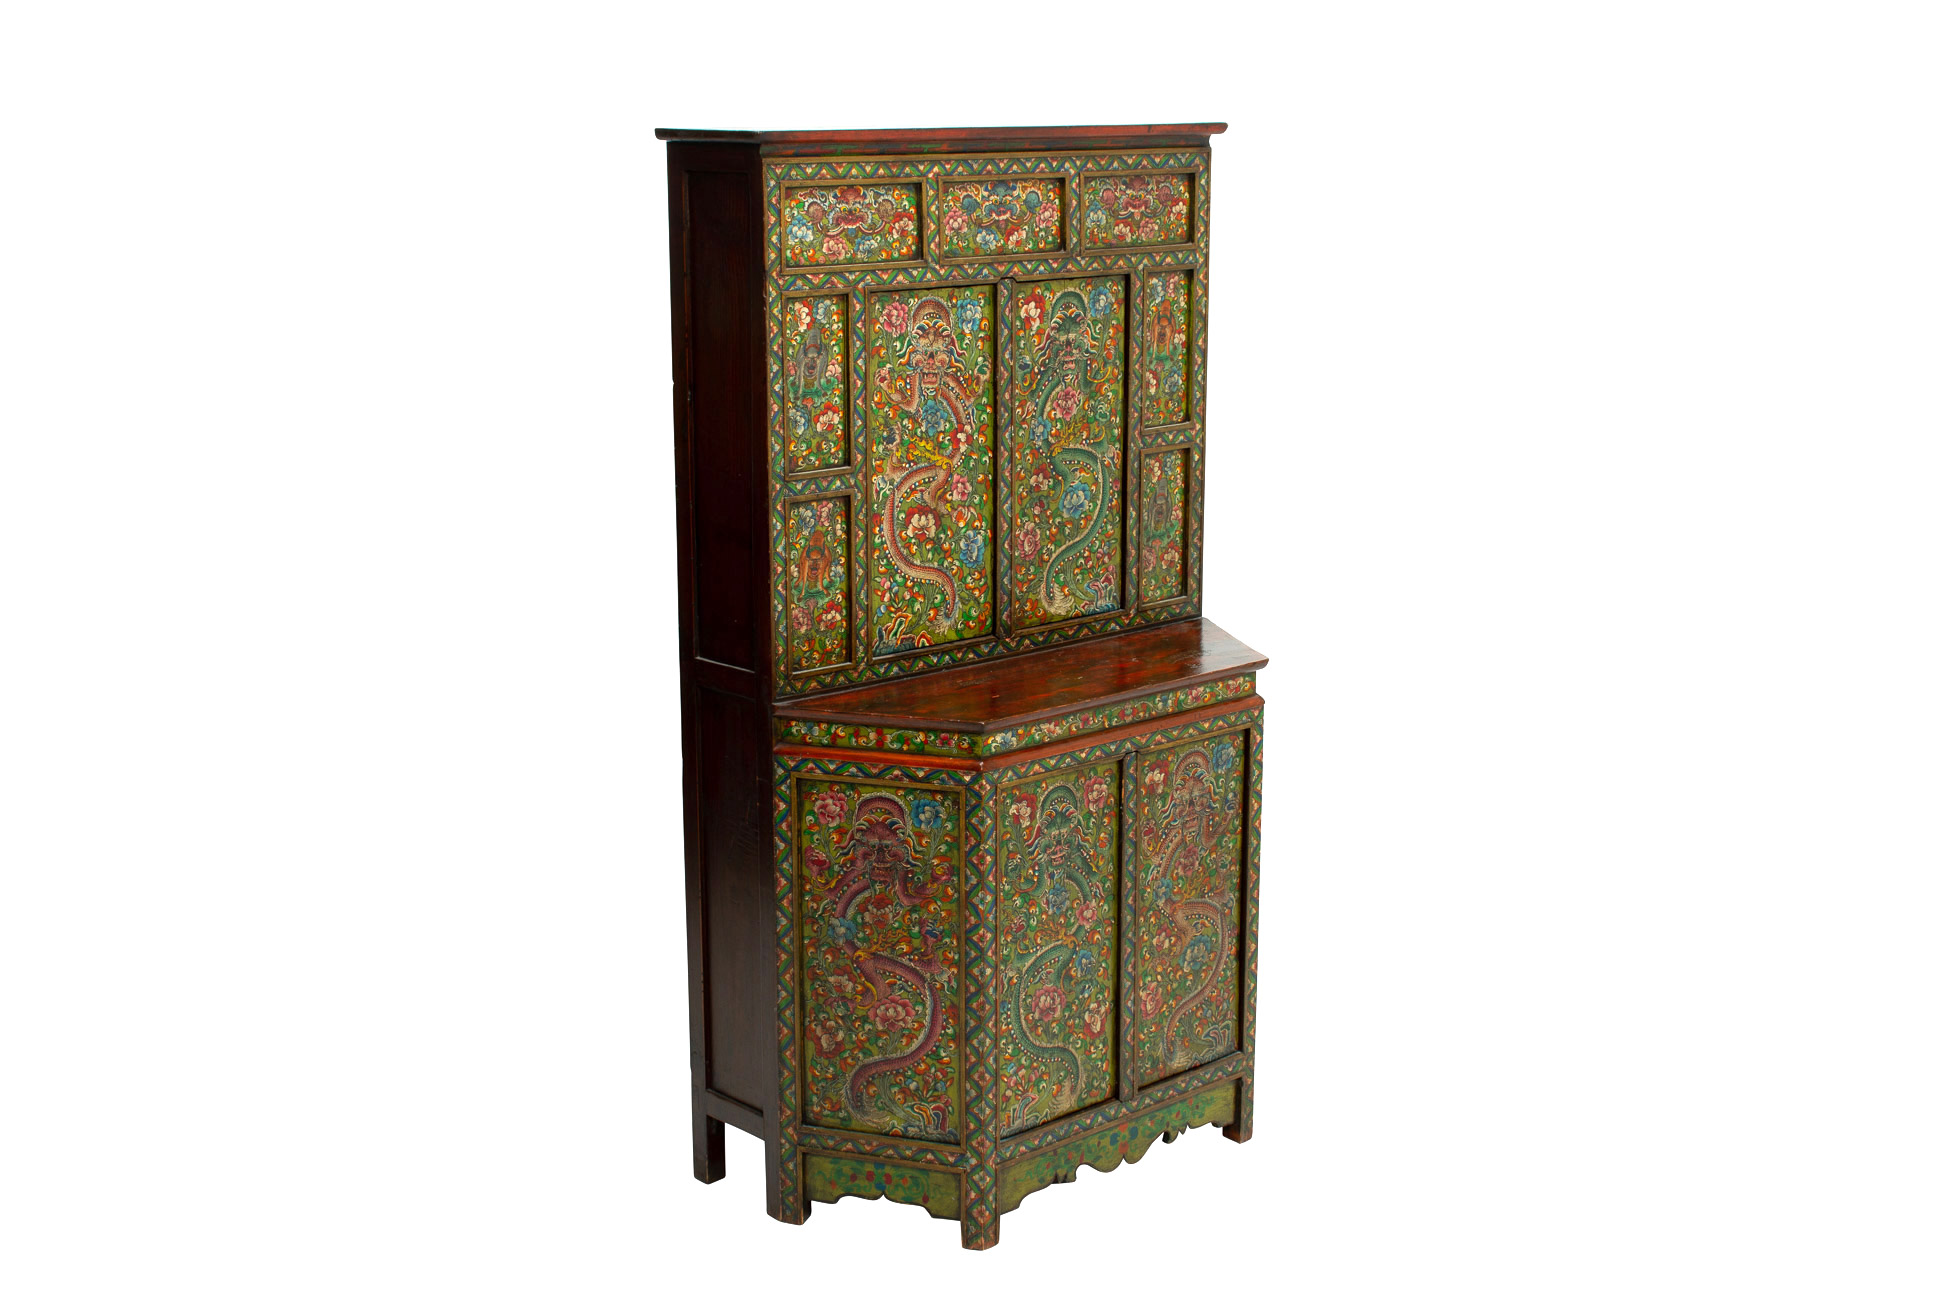 A TIBETAN POLYCHROME DECORATED CABINET